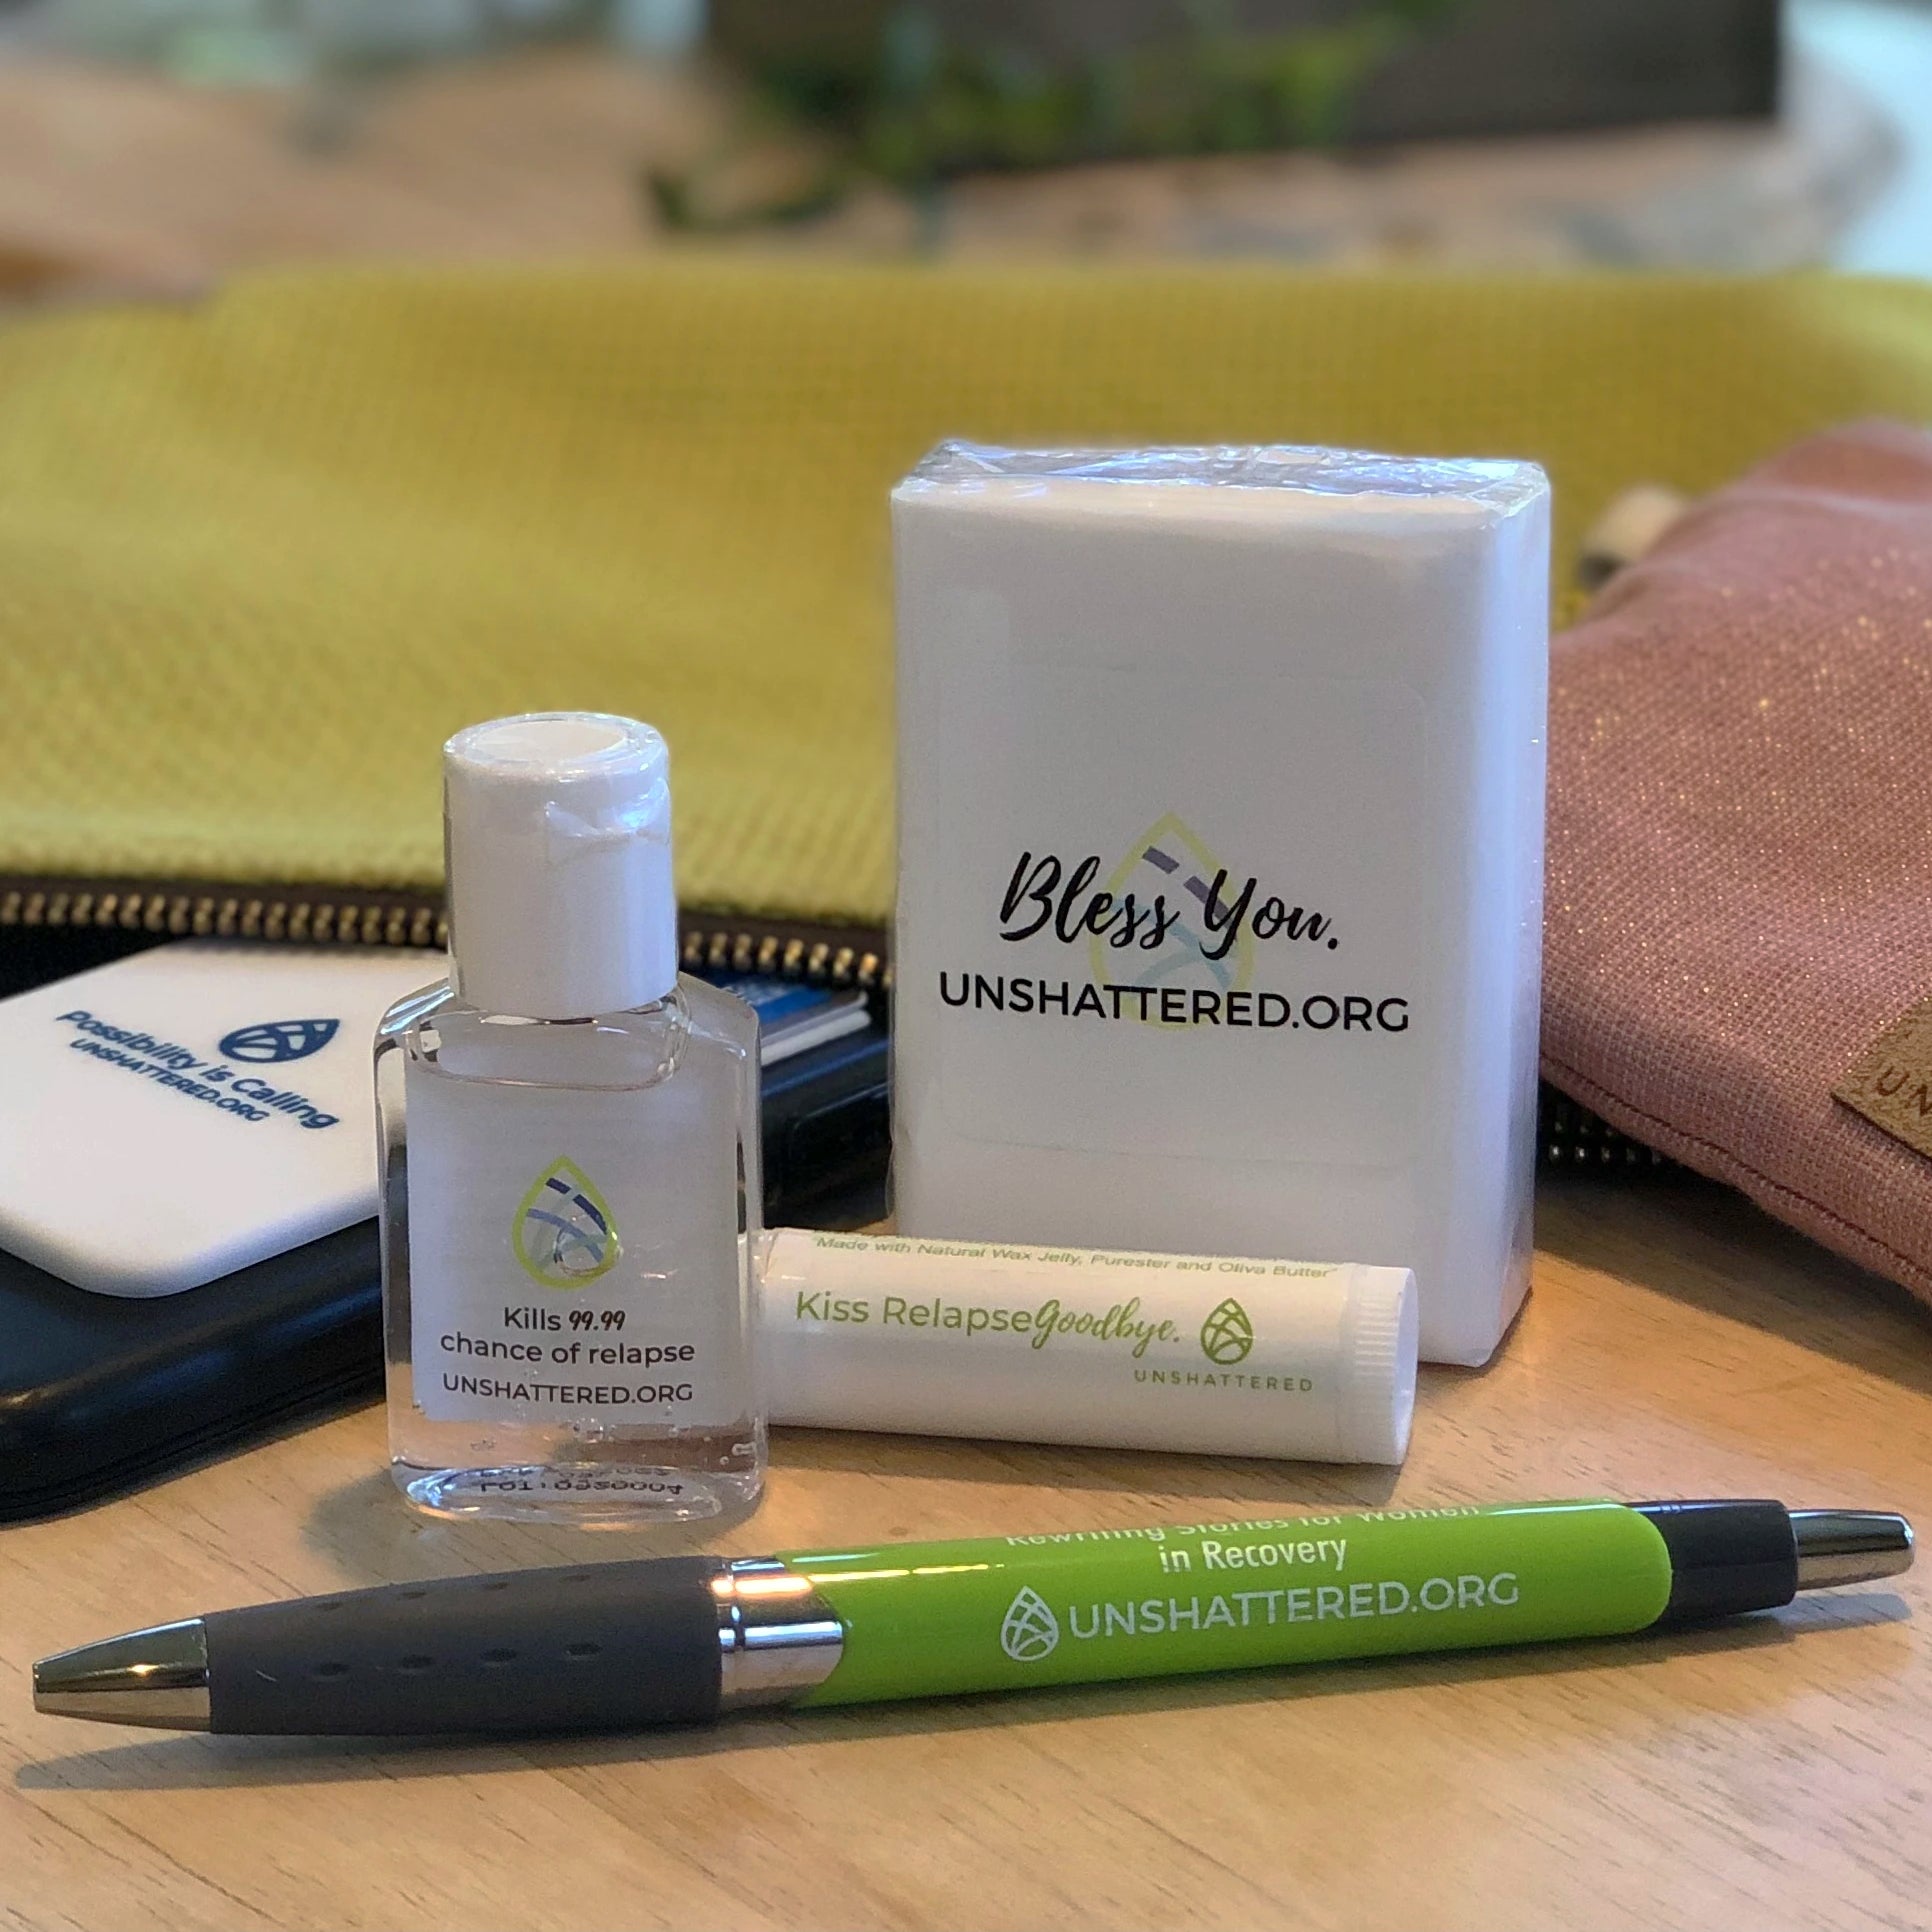 One green pen, one small bottle hand santizer, one tissue pack, one phone with rubber phone case attached to the back sit on a wood table peaking out of a small tan pouch.